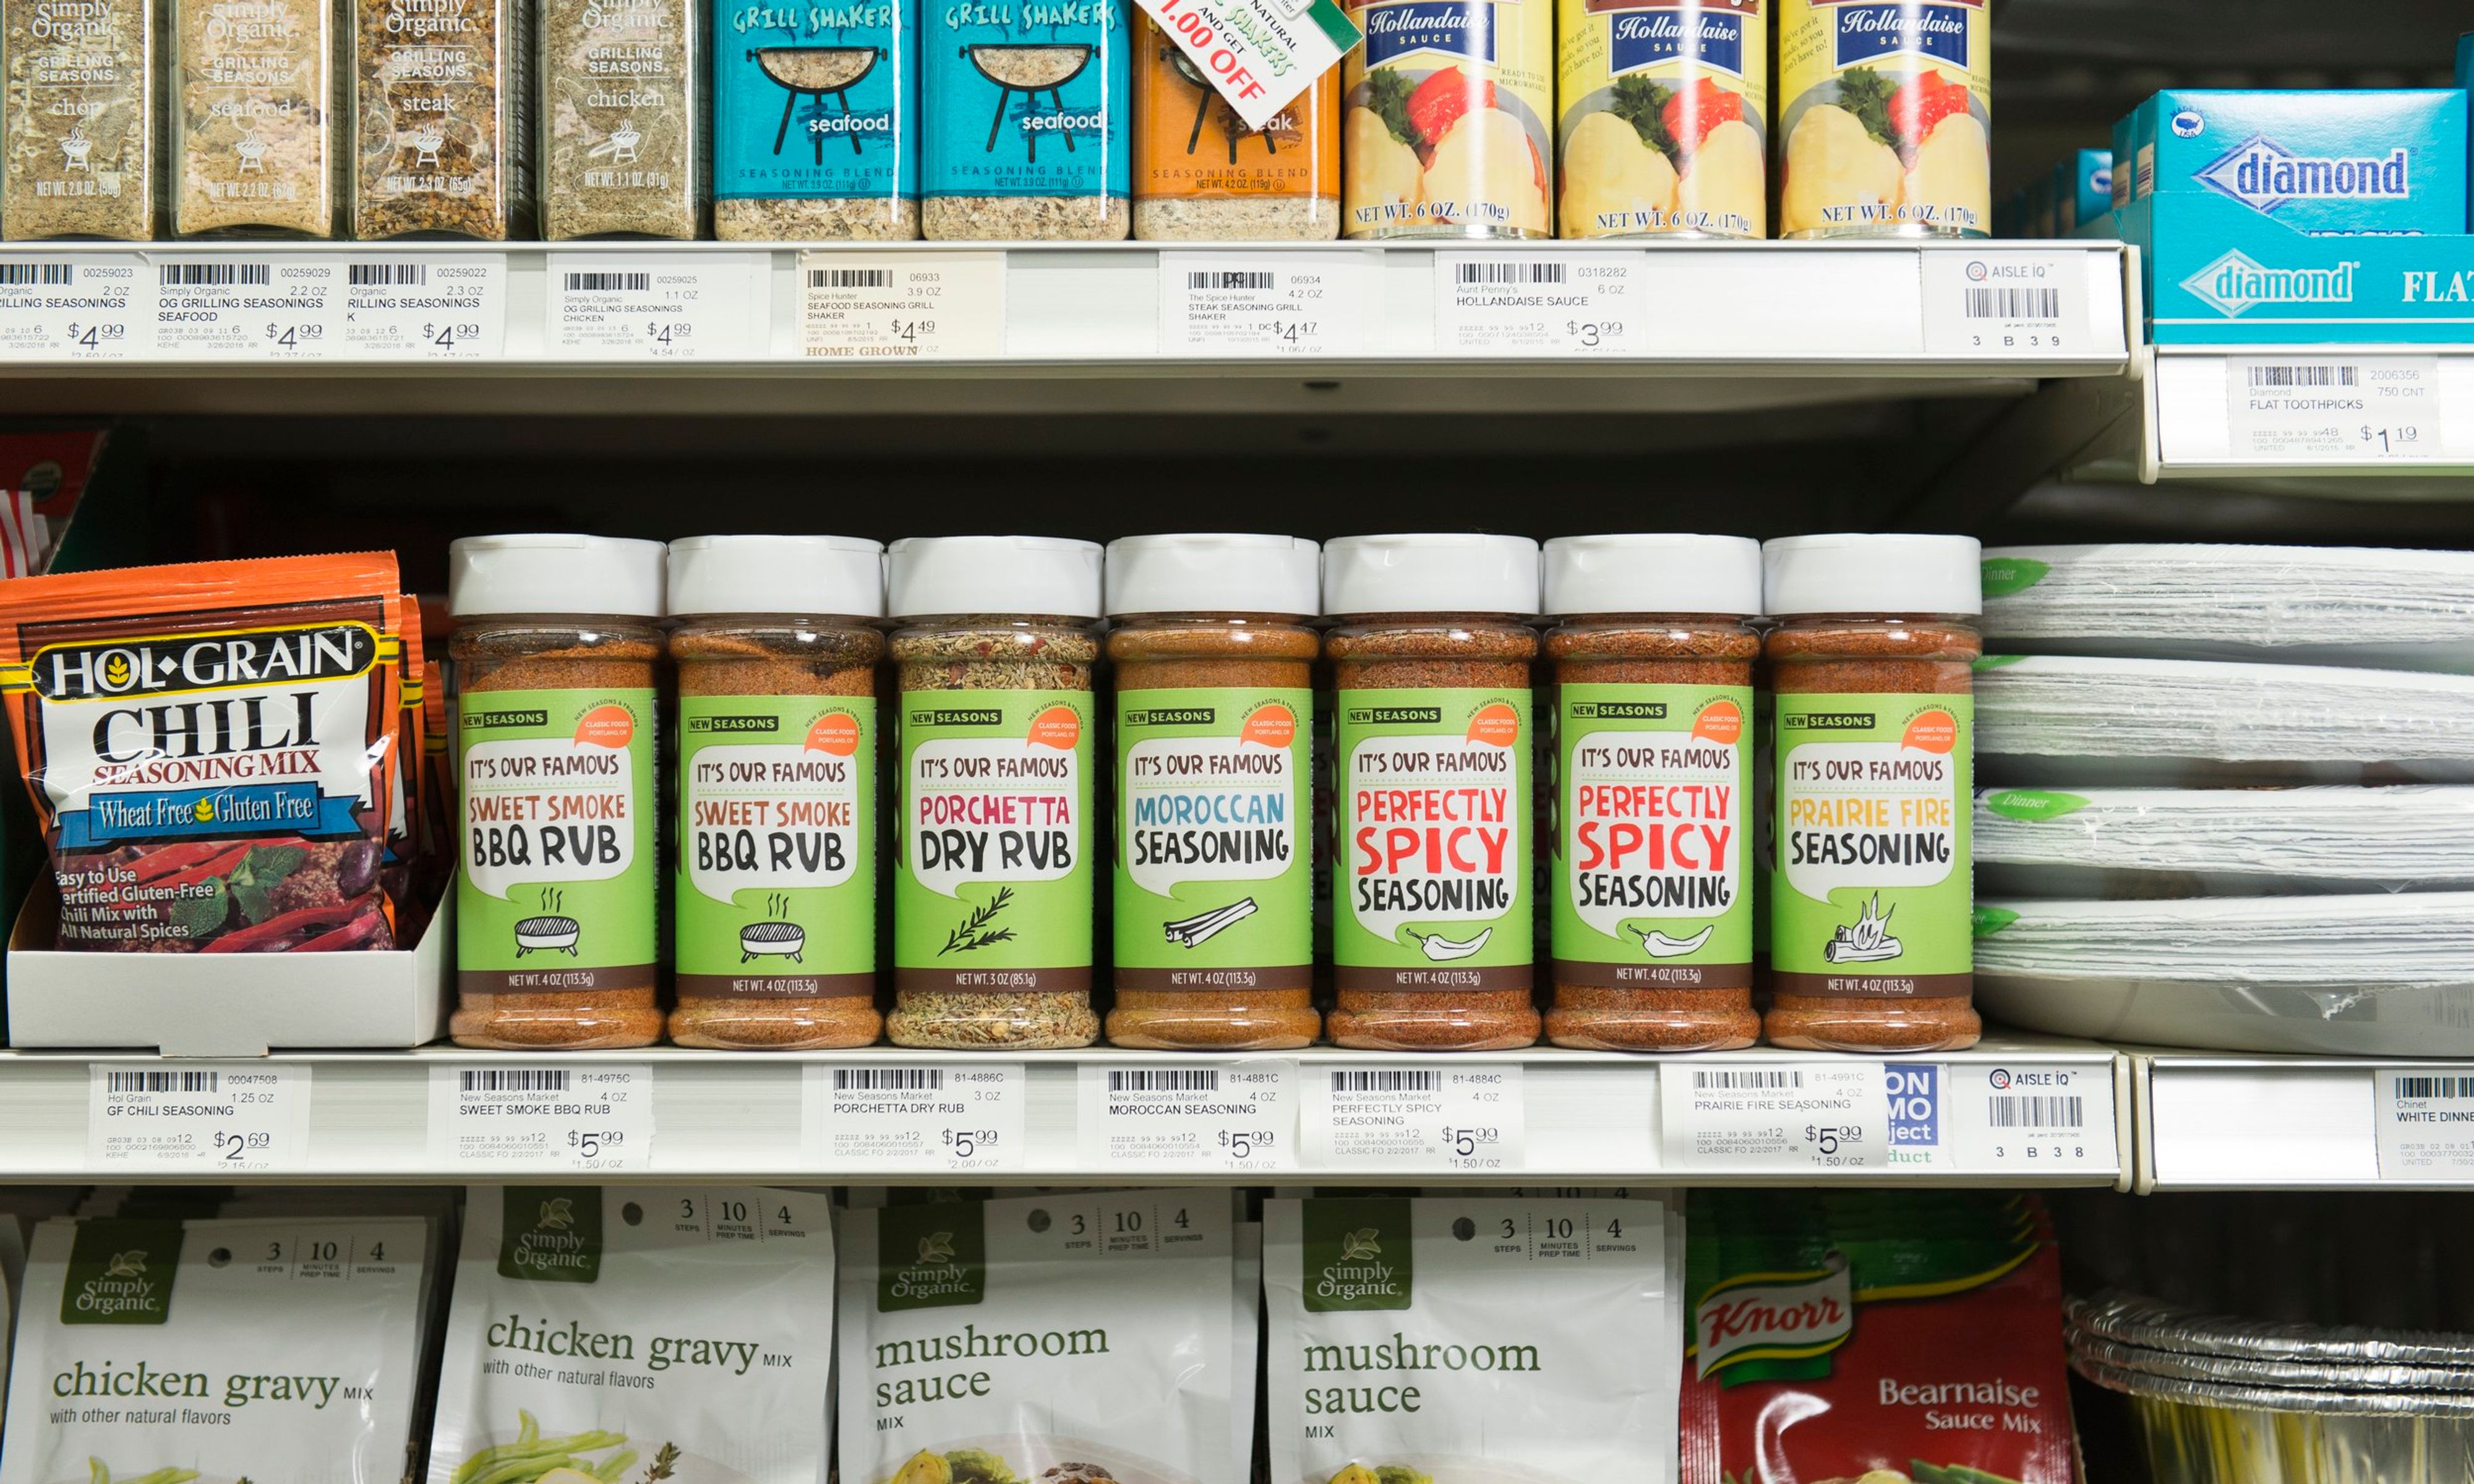 A row of seven spices made by New Seasons sitting on a grocery store shelf next to other spices, gravy, sauces, and paper plates